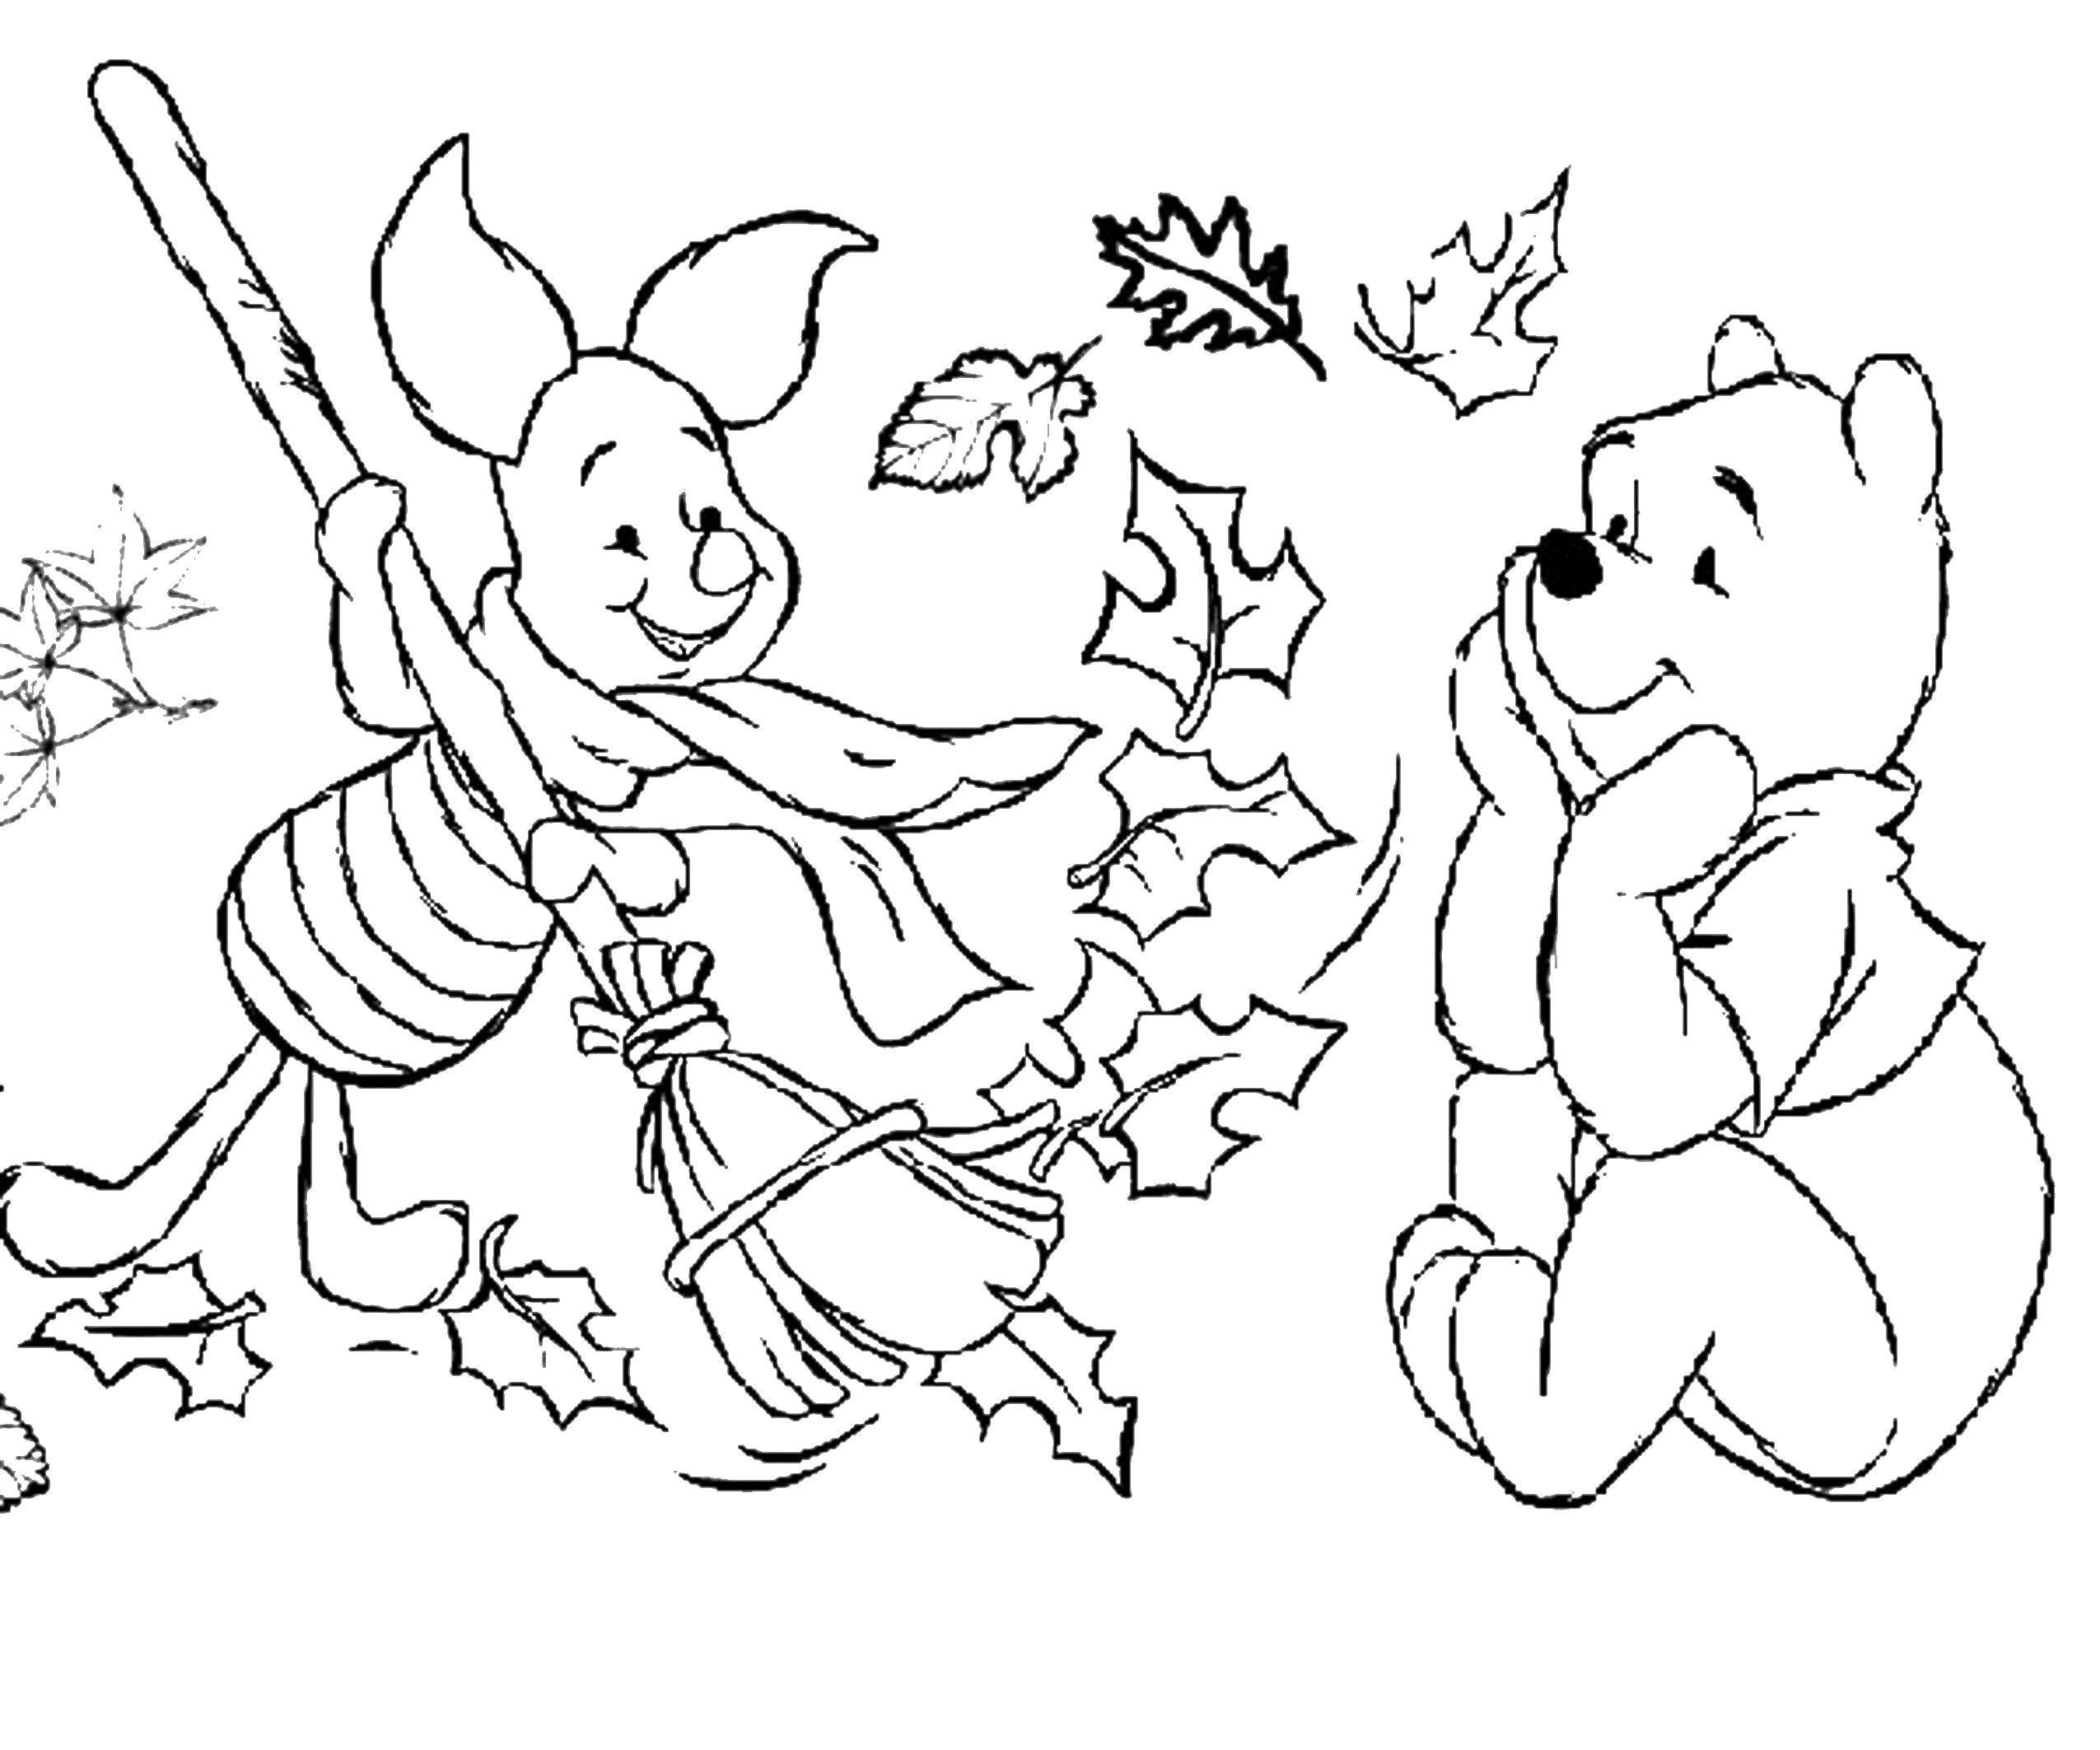 Coloring Winnie the Pooh and Piglet. Category coloring for little ones. Tags:  Winnie the Pooh, Piglet.